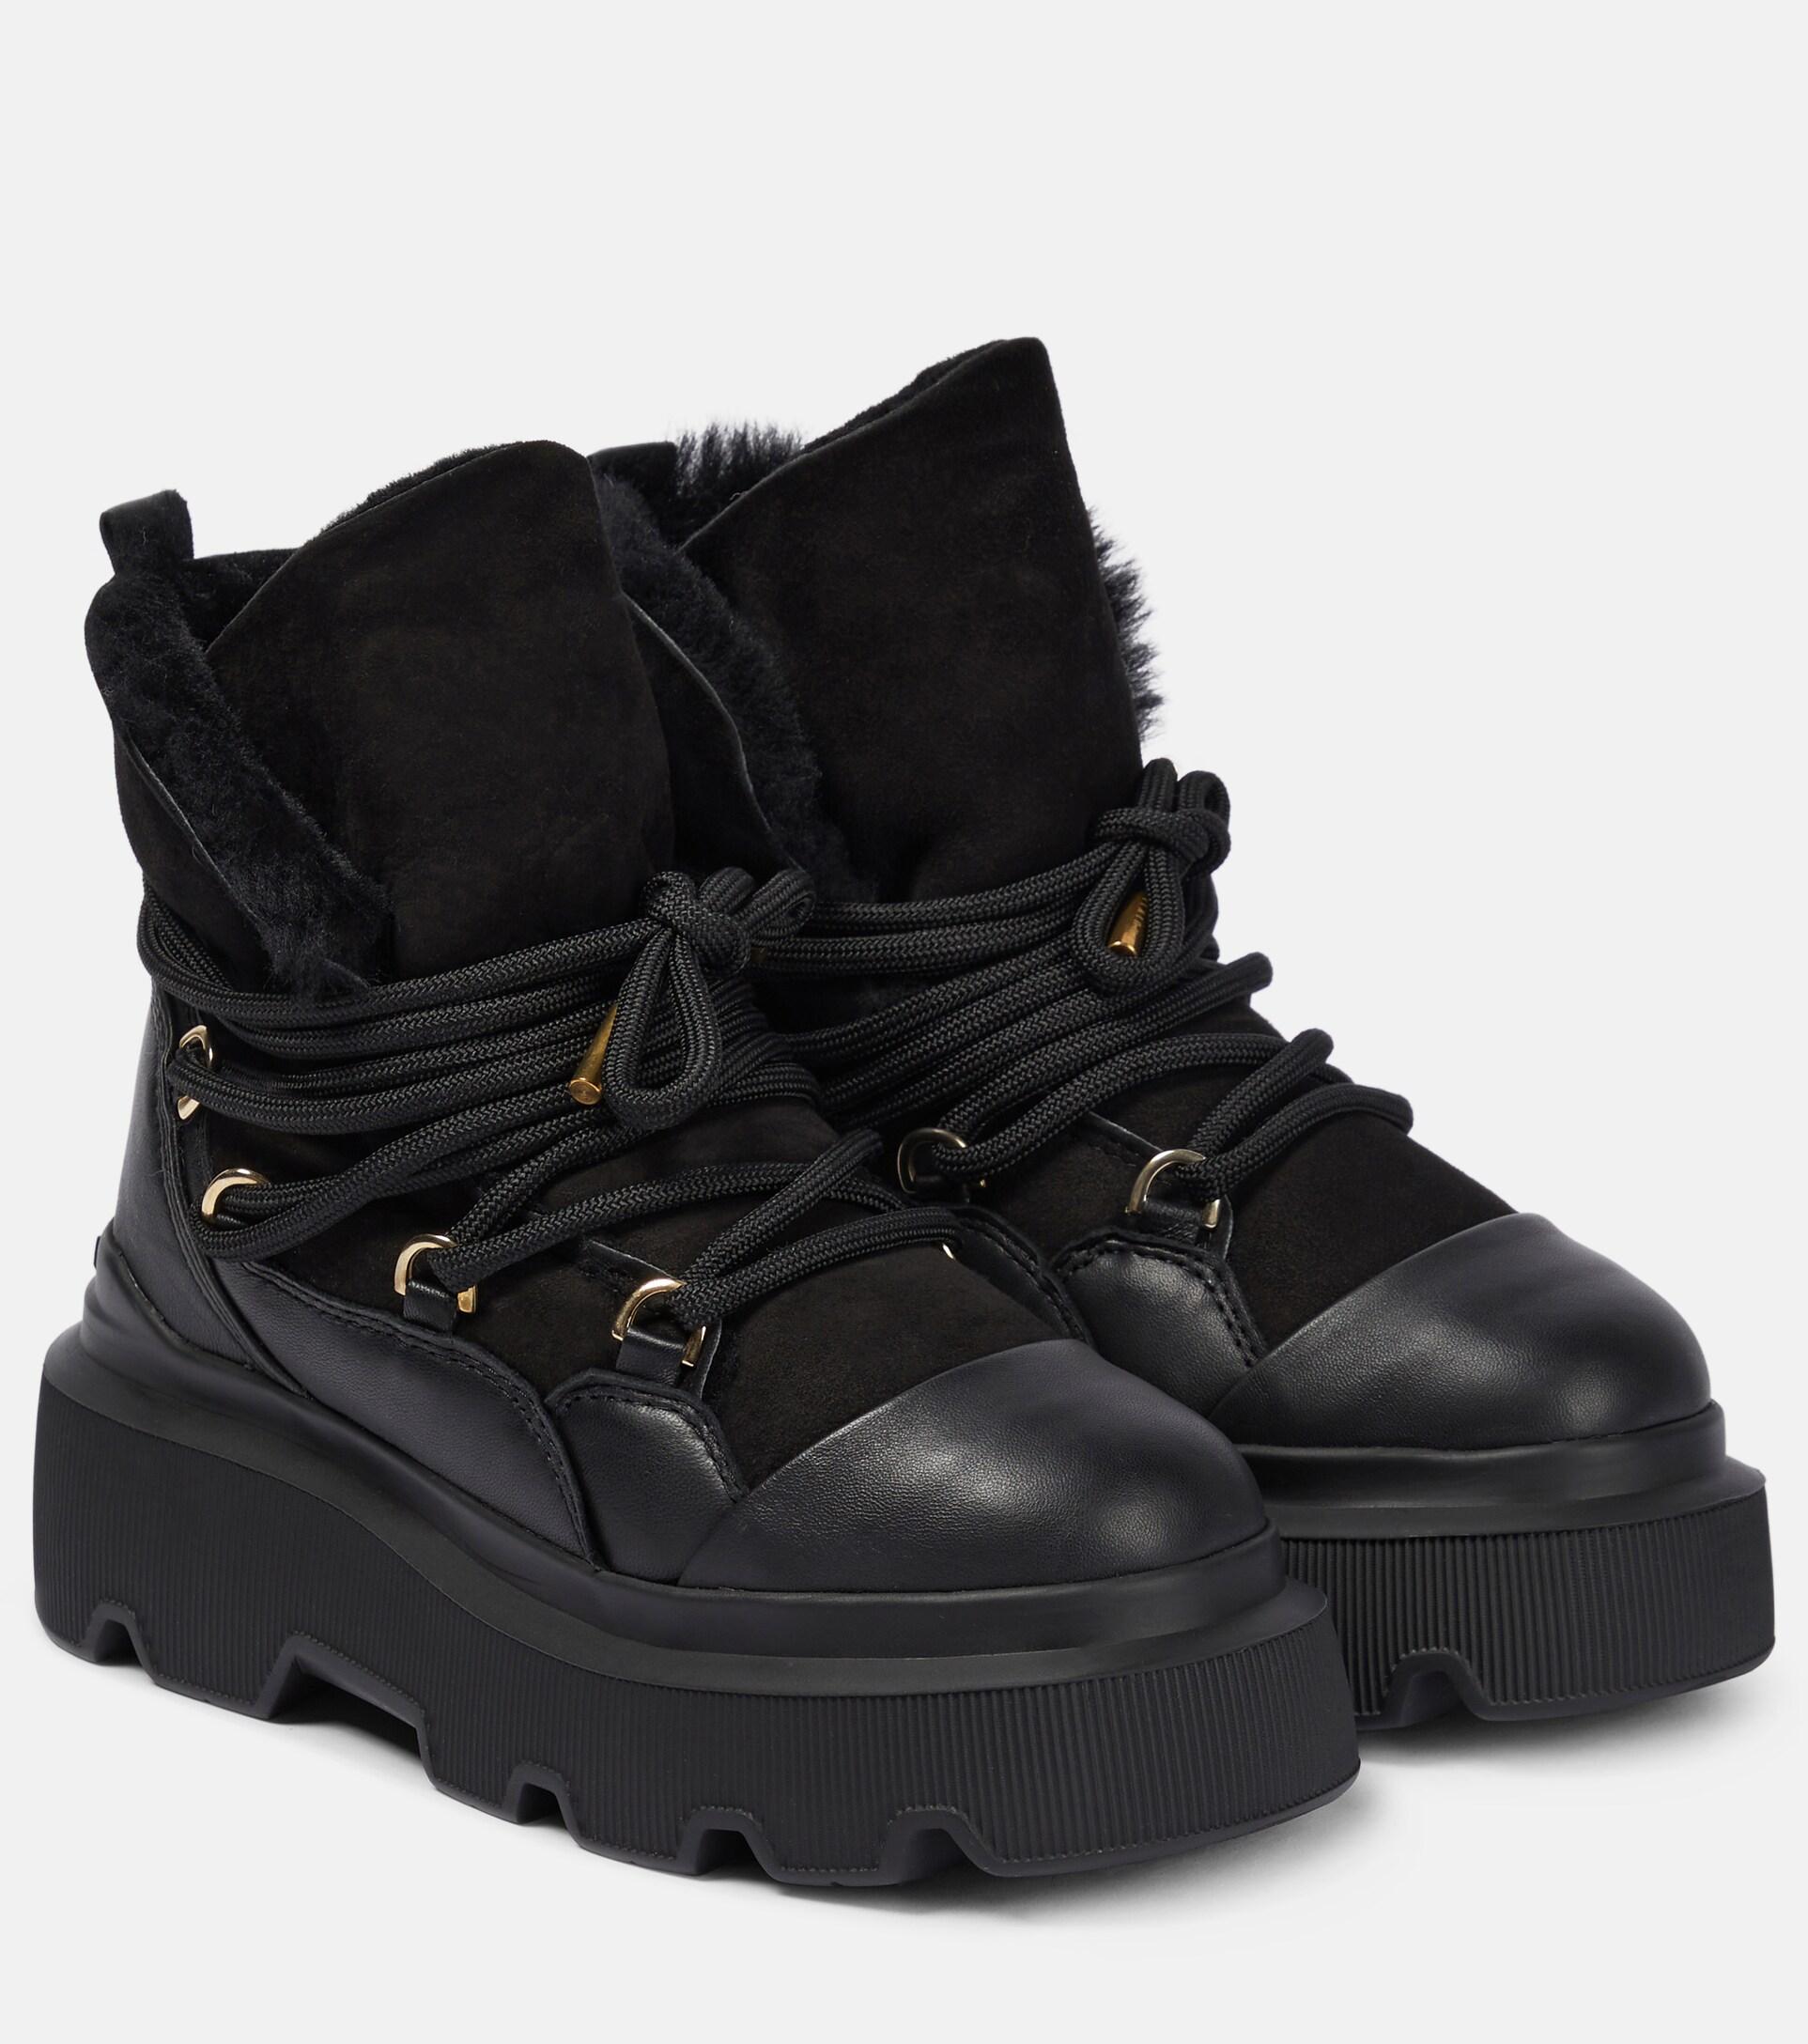 Inuikii Endurance Shearling-lined Boots in Black | Lyst